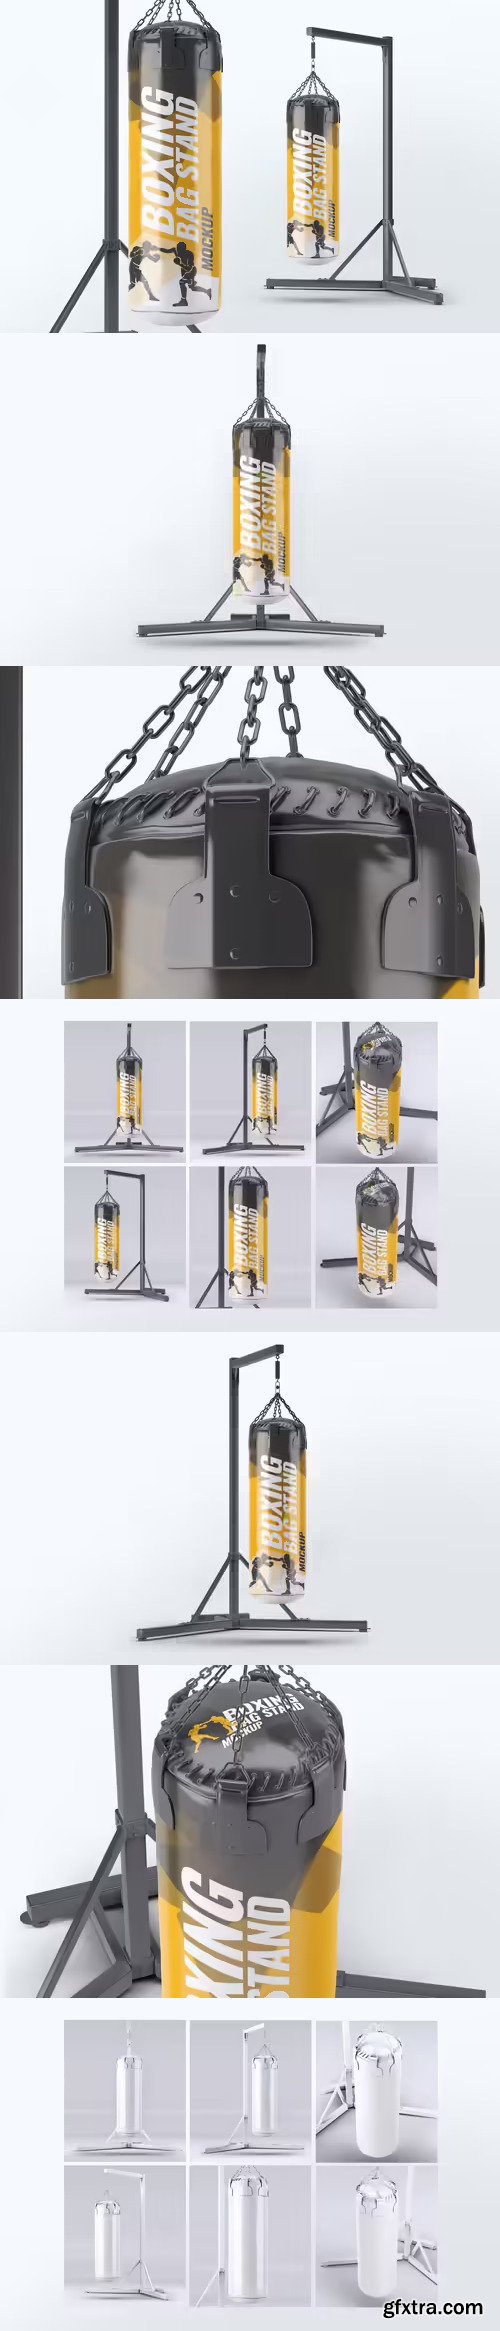 Boxing Bag Stand Mock-Up